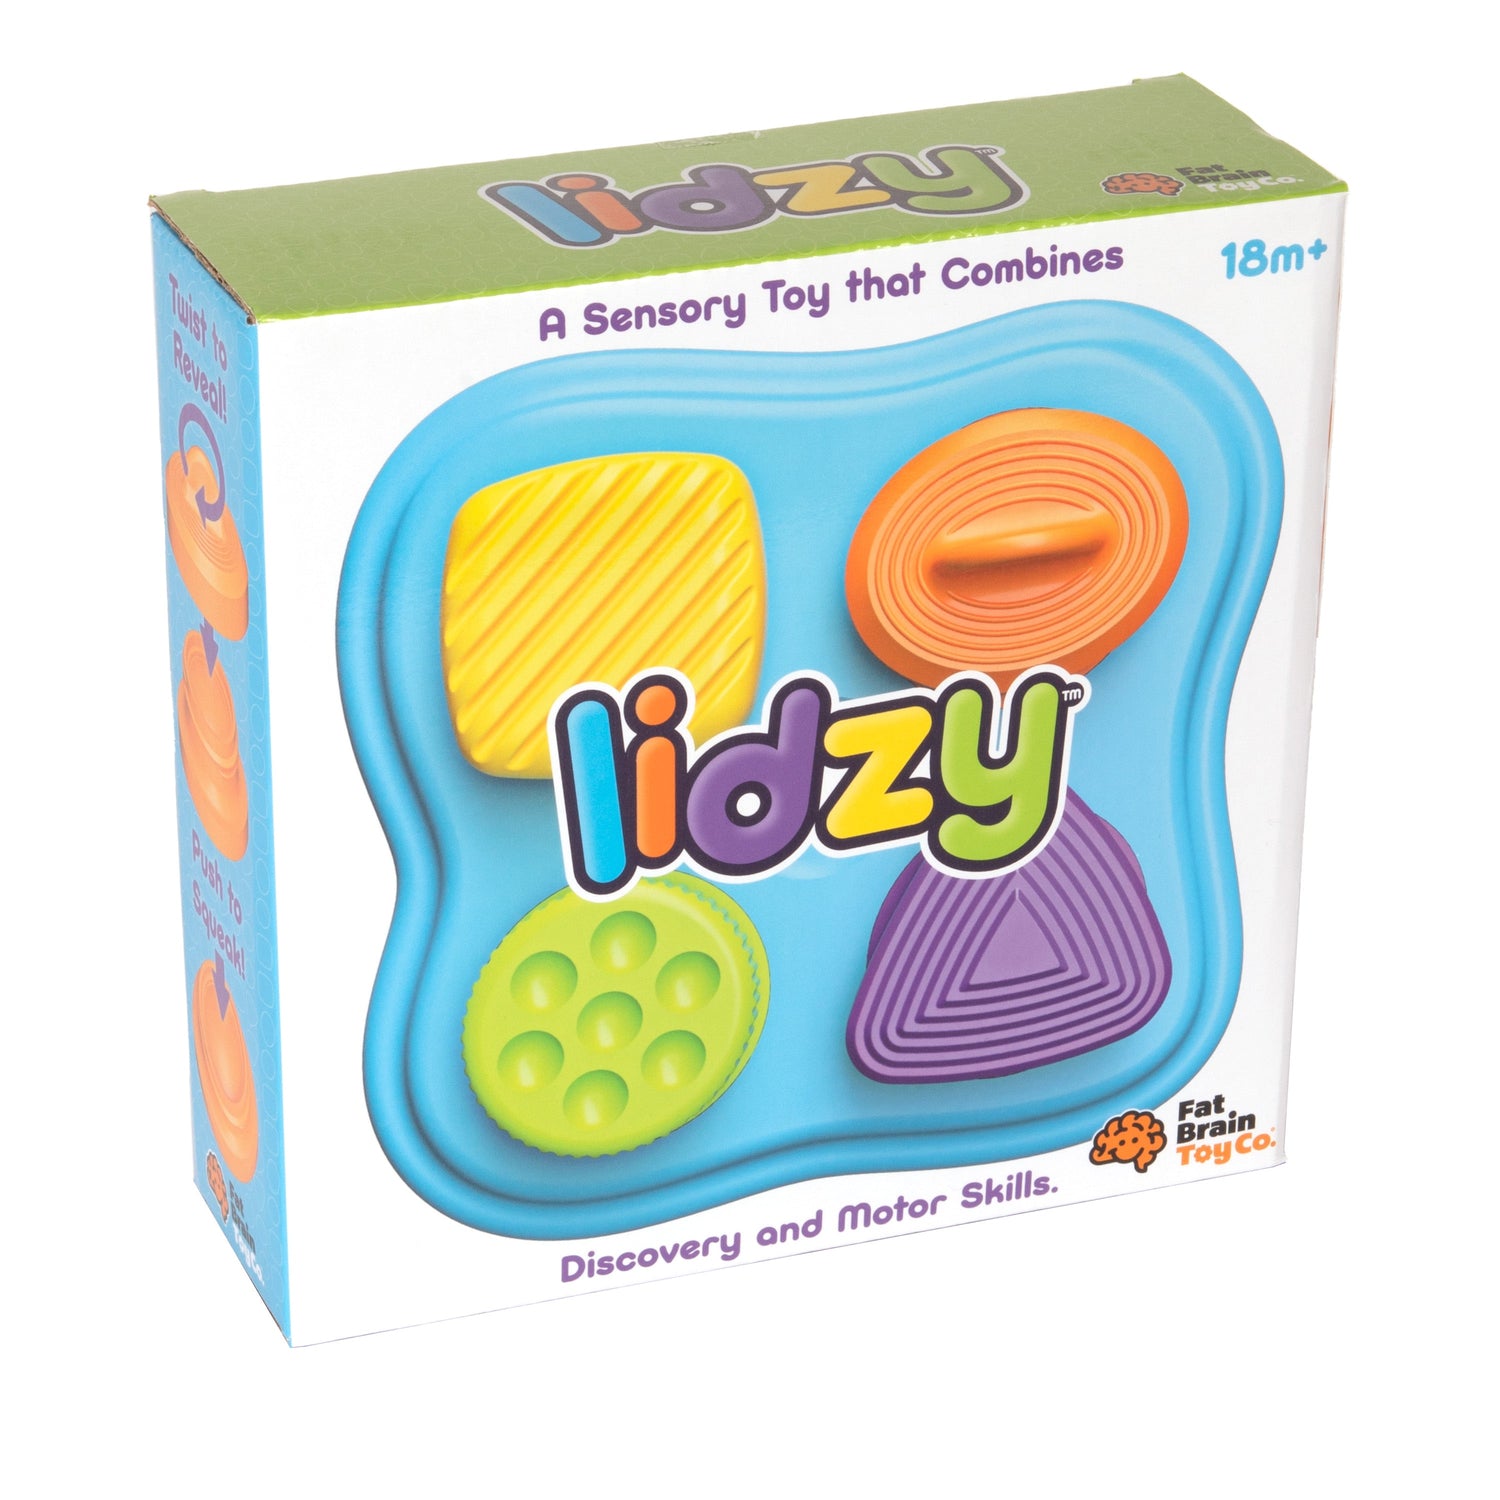 LIDZY by FAT BRAIN TOYS - The Playful Collective